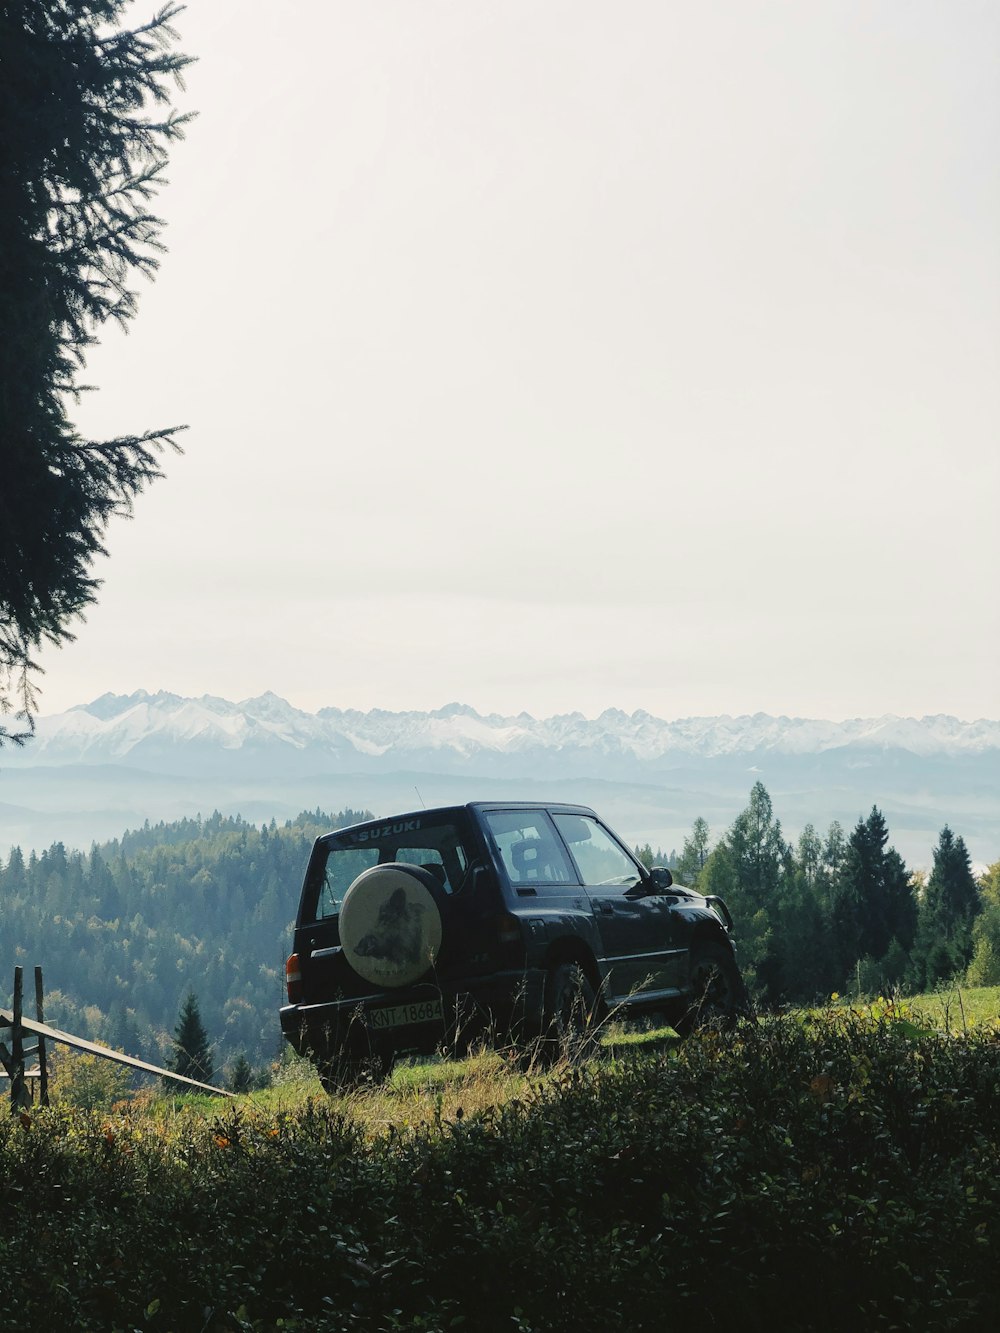 black suv on green grass field near green trees and mountains during daytime